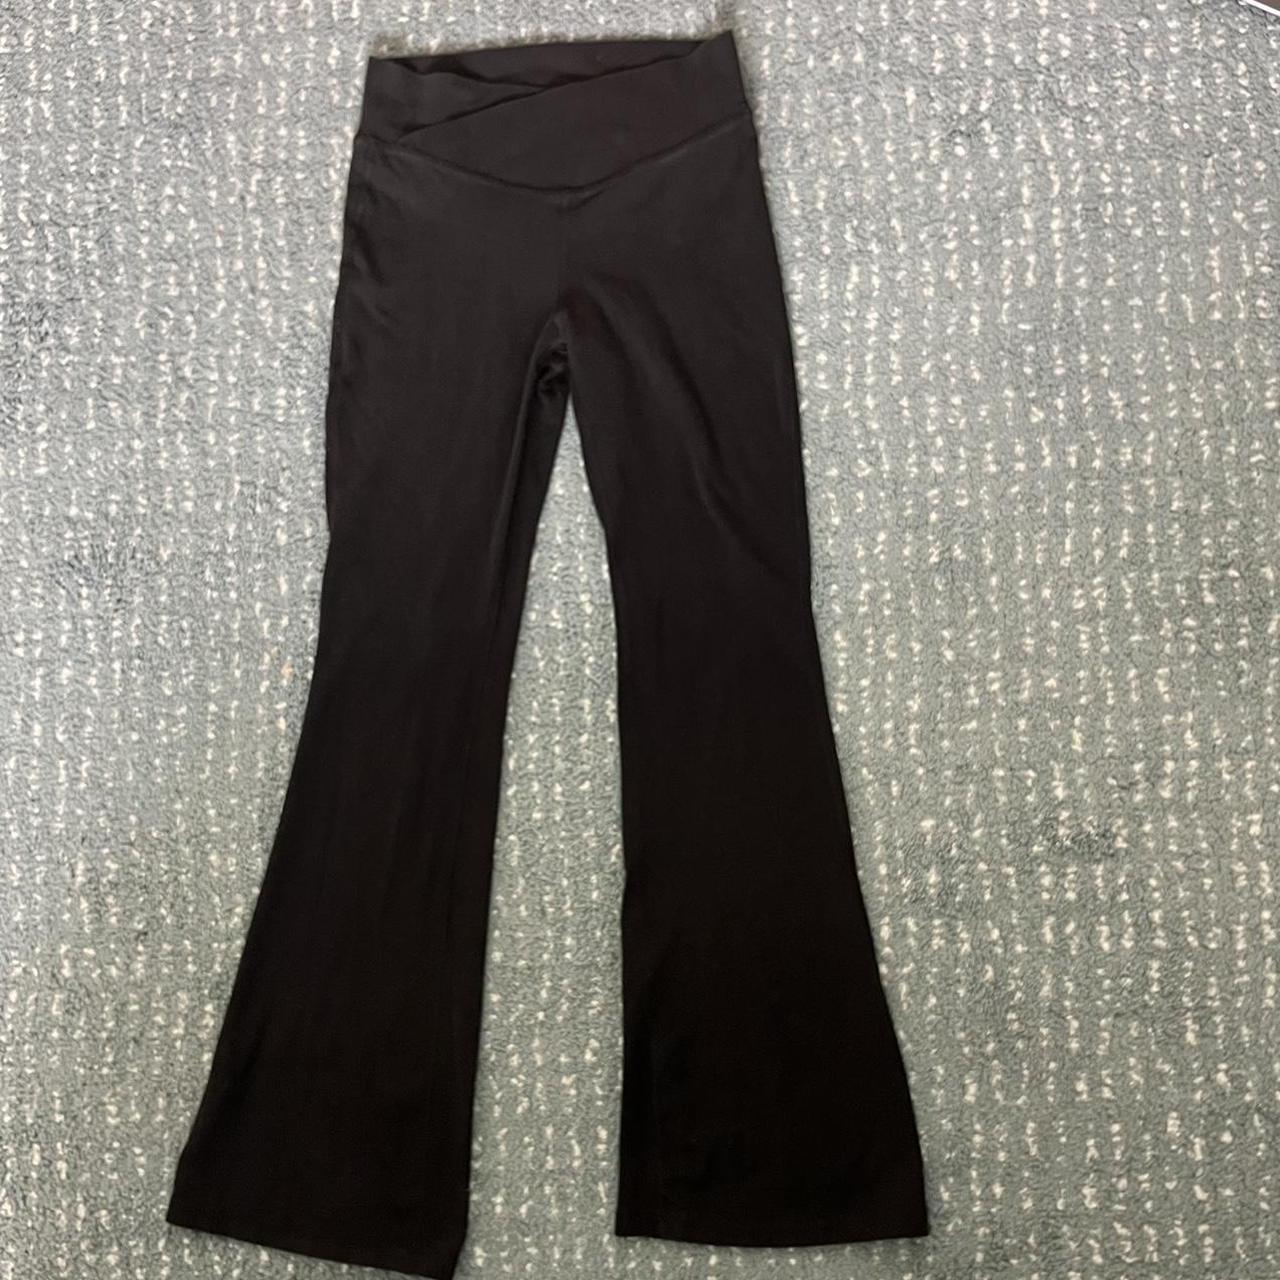 old navy flare leggings. in great condition, i would - Depop